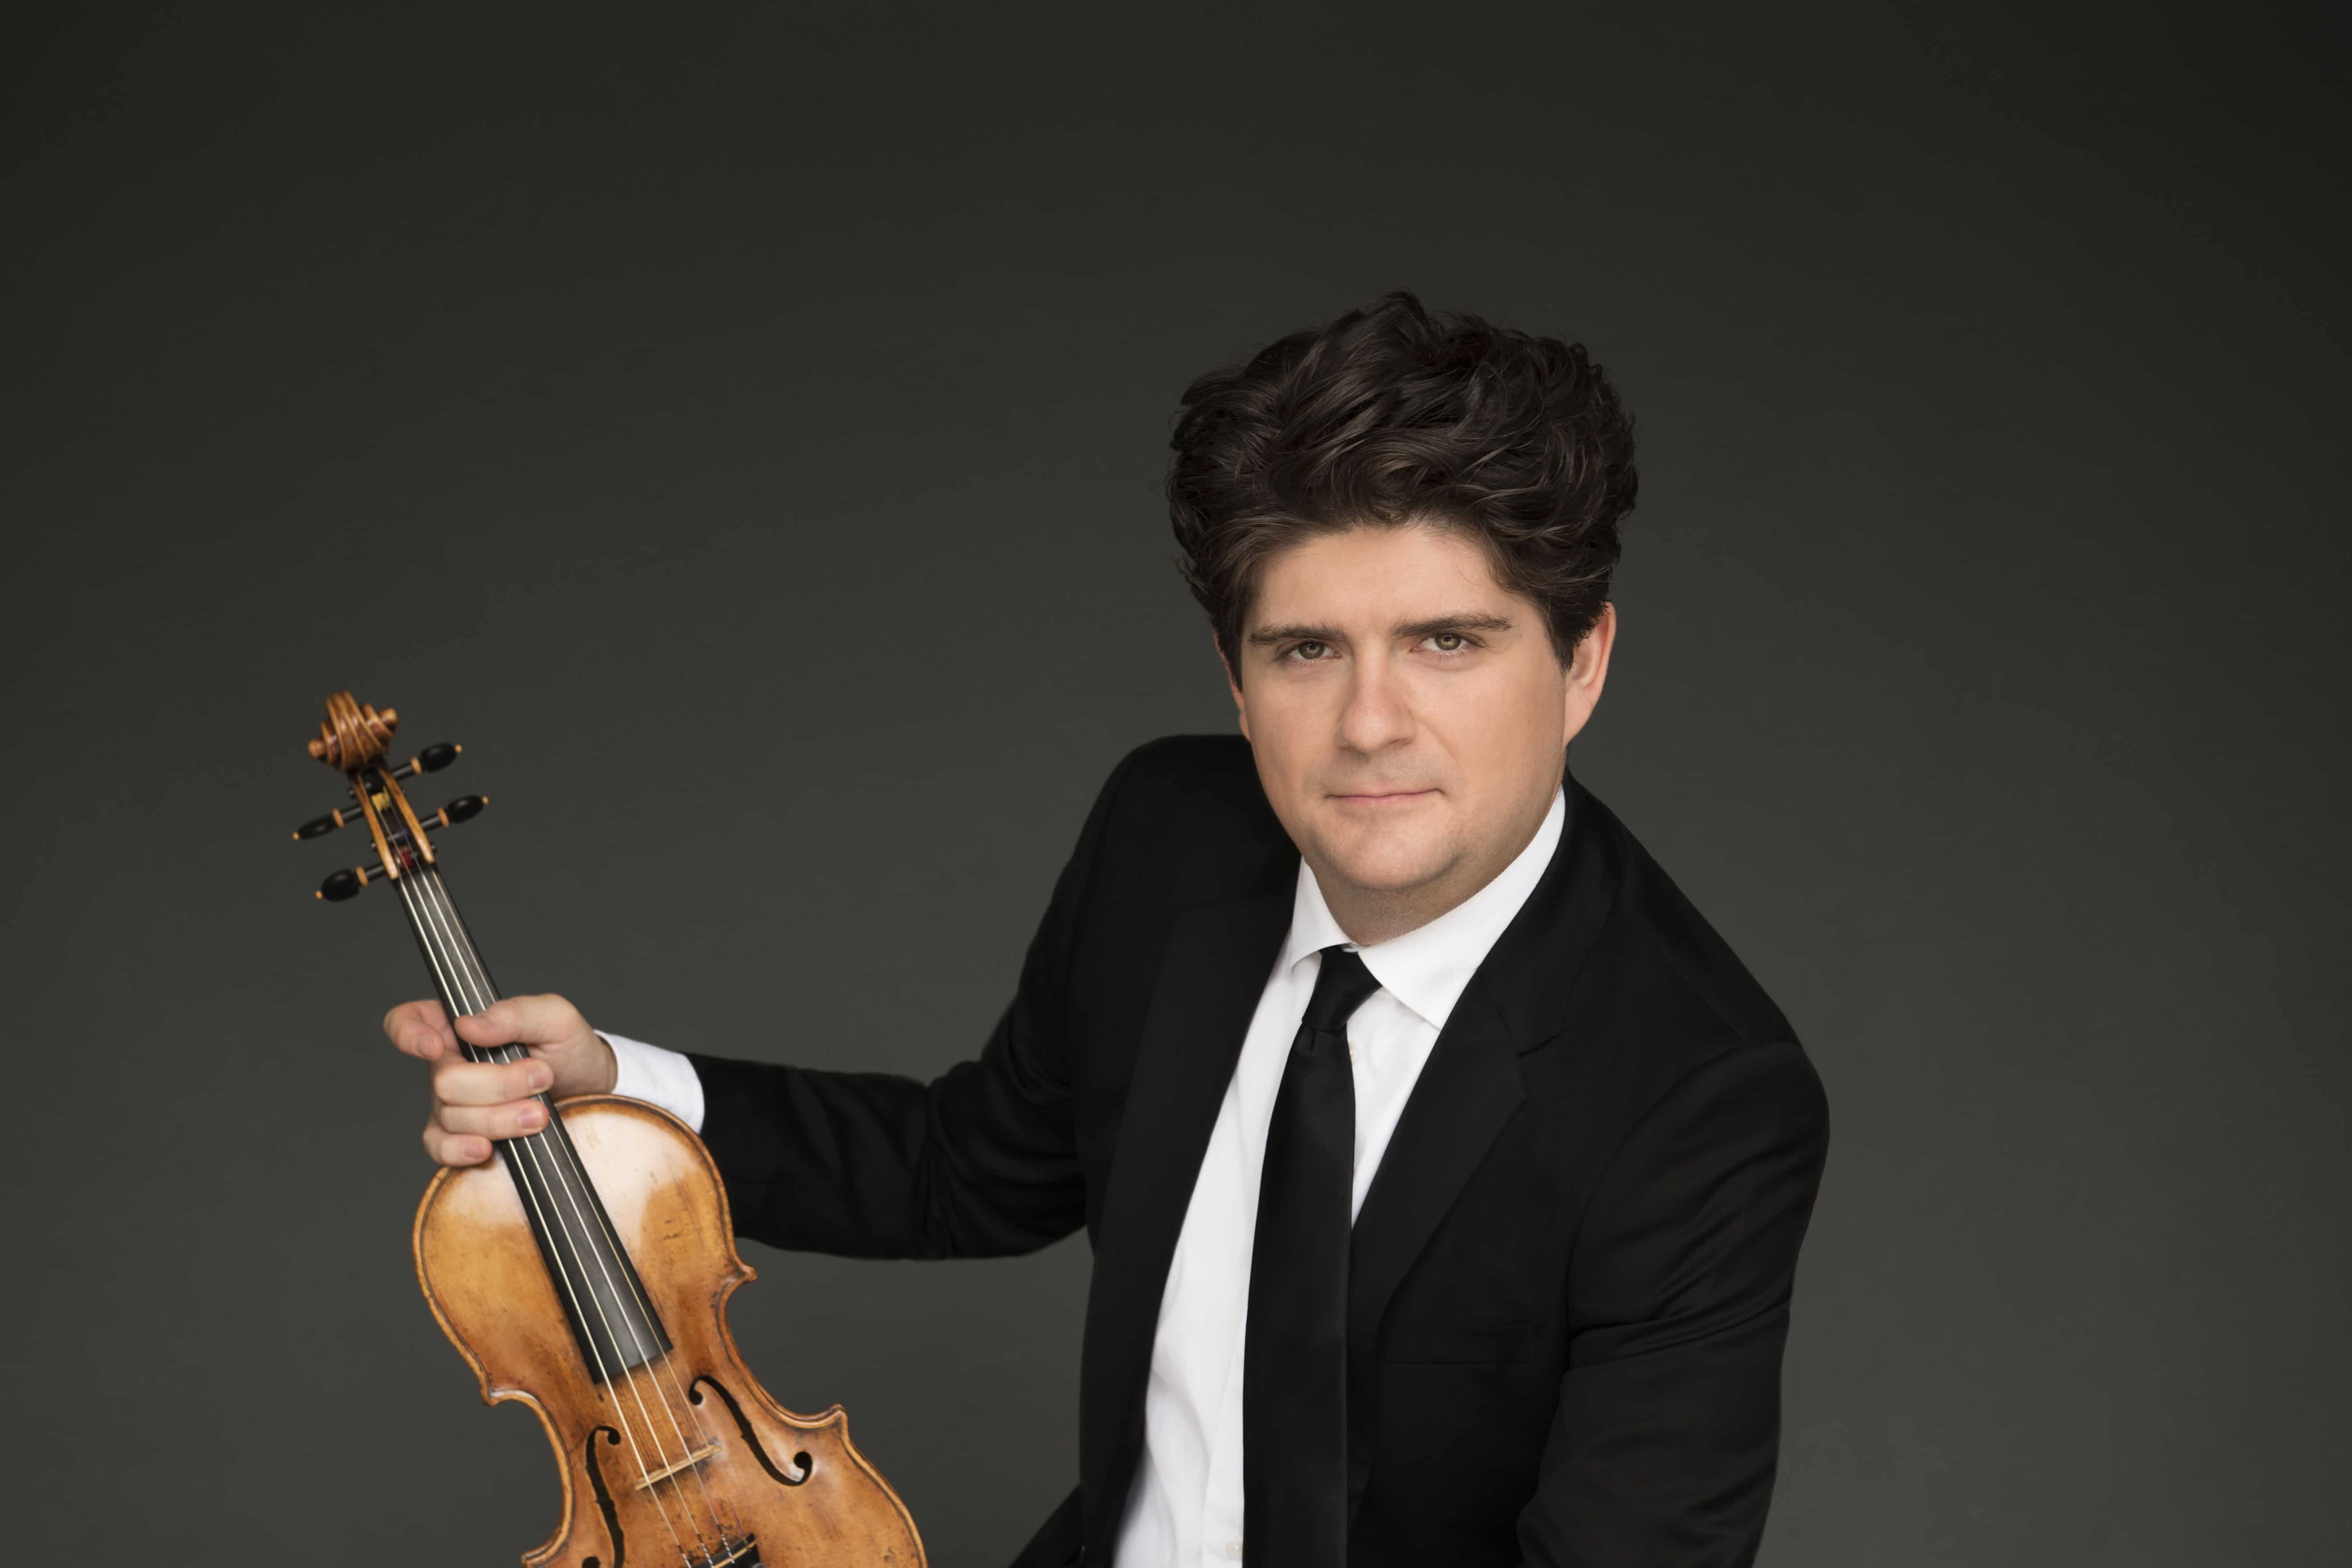 Just in: Vienna has a French concertmaster